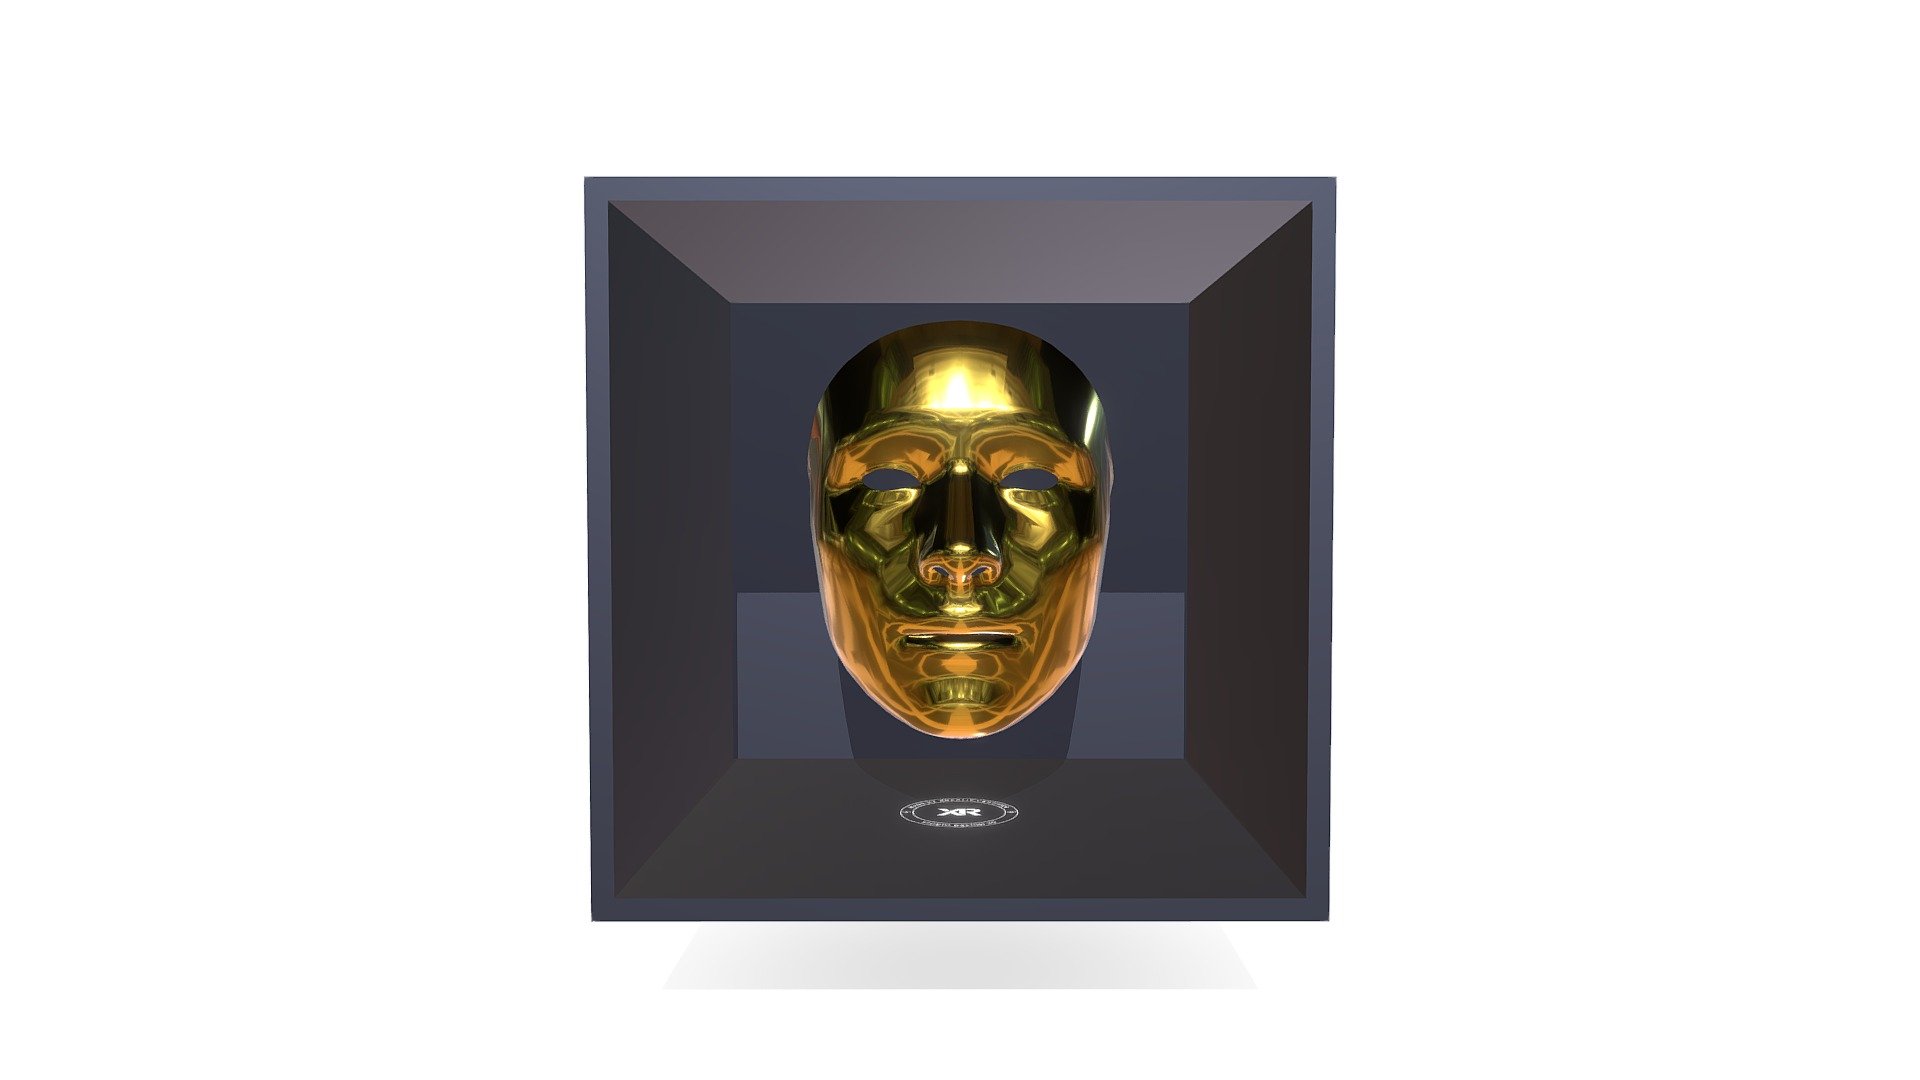 Meta Human - Face Mask   [ Gold  ]

Meta Human Head 
Limited Edition Digital Art ( Series )

Digital Art Creation by Artist LBro.

FOLLOW US or CONNECT WITH US &ndash;&gt; Share or Like
Thank You !




Website

Facebook 

Twitter

Youtube
 - Meta Human - Face Mask [ Gold ] - 3D model by xrealis 3d model